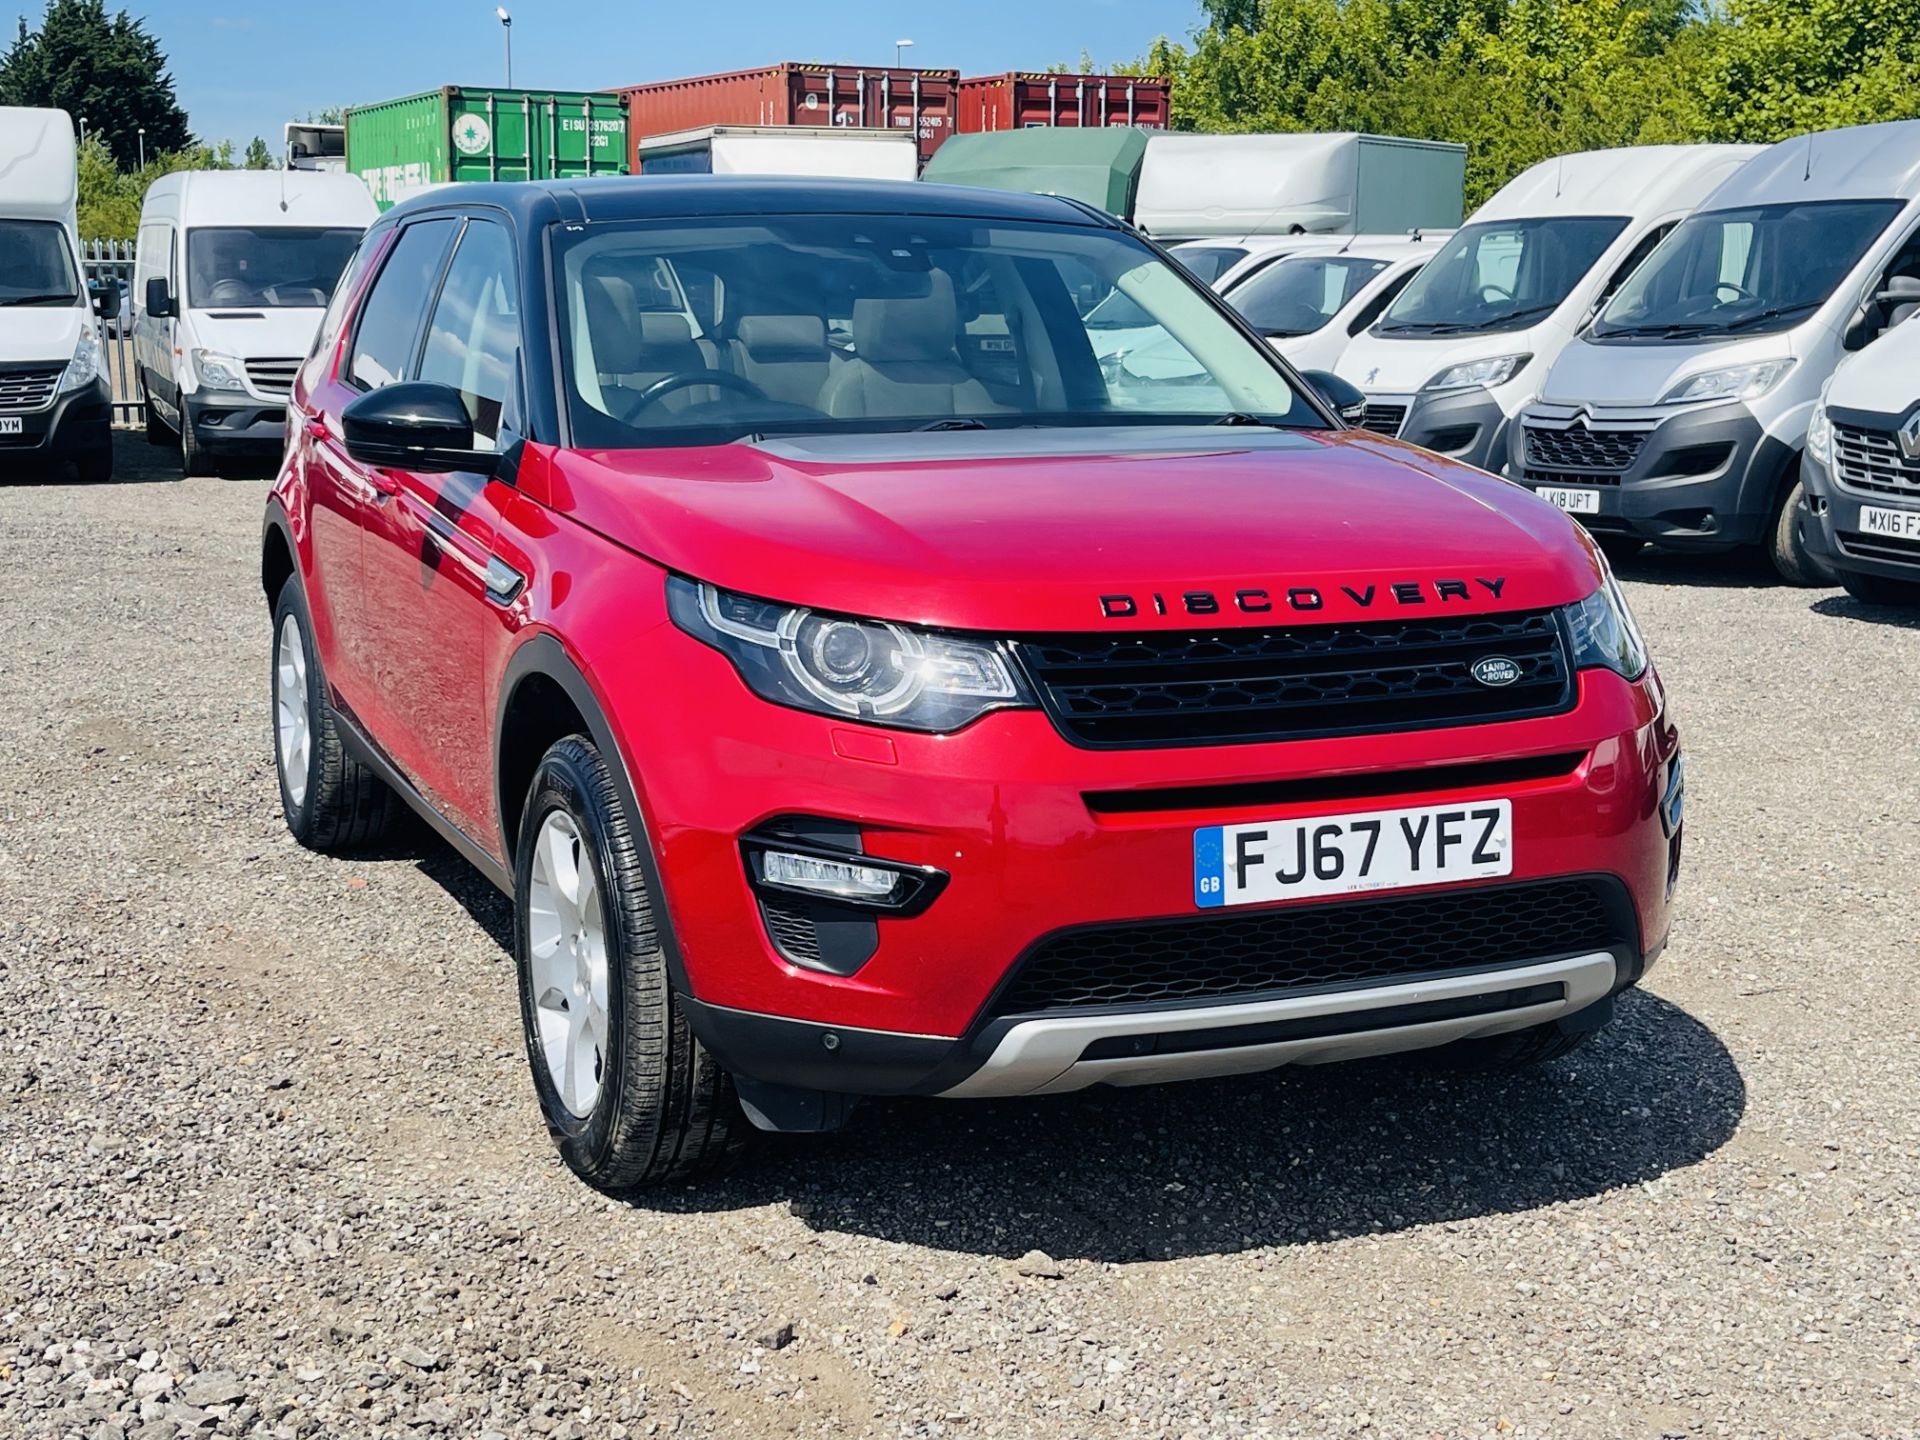 ** ON SALE ** Land Rover Discovery Sport HSE 2.0 ED4 2017 '67 Reg' Sat Nav - Panoramic Glass Roof - Image 3 of 33